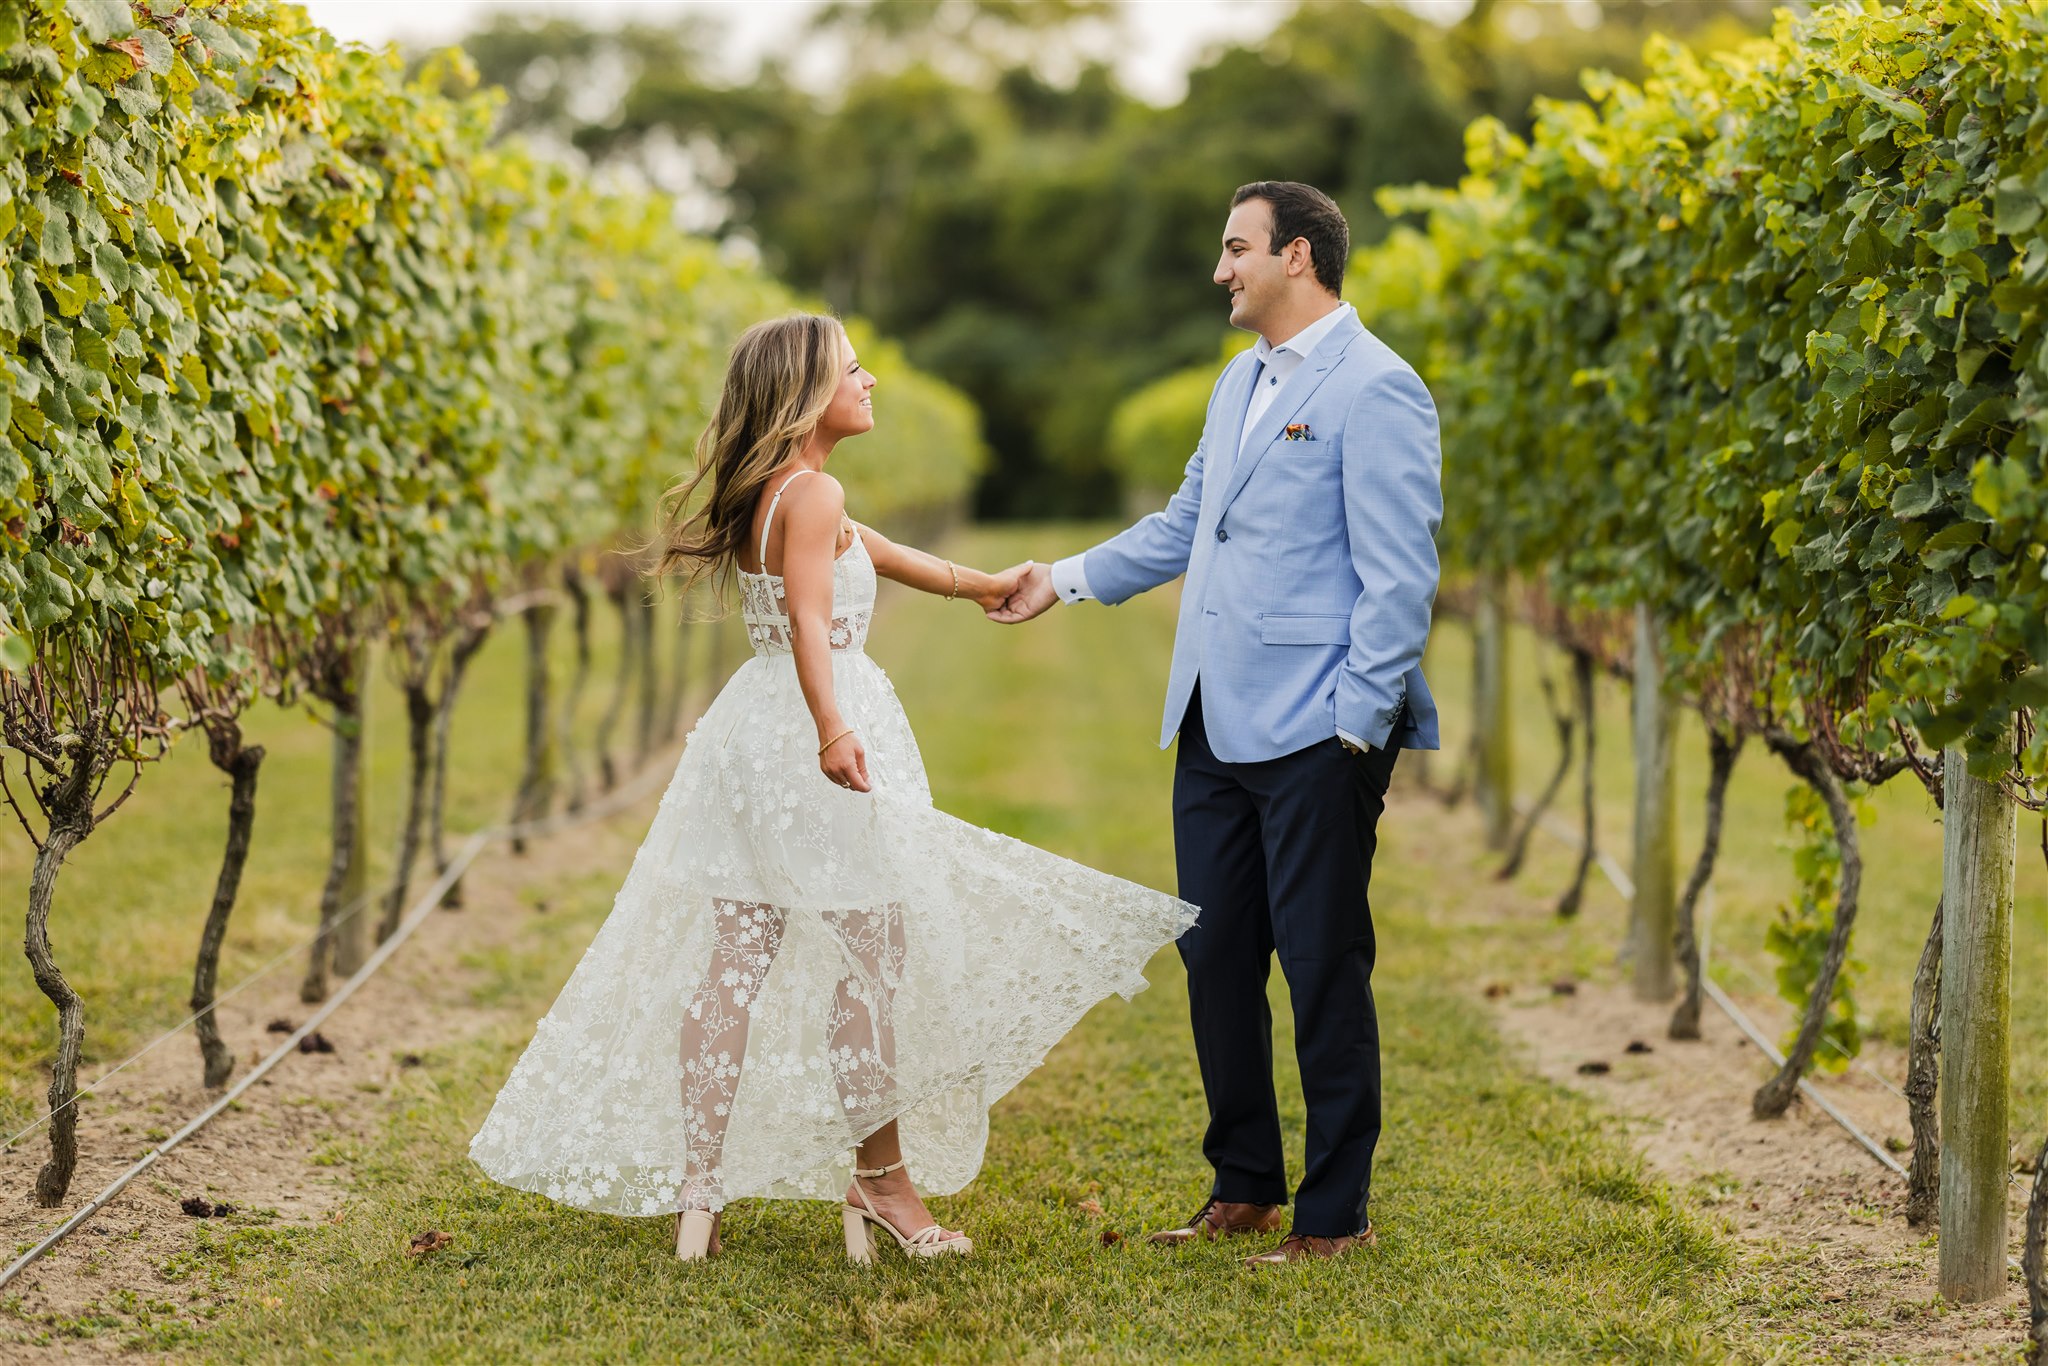 Newly engaged couple's photo session at Willow Creek vinery in Cape may